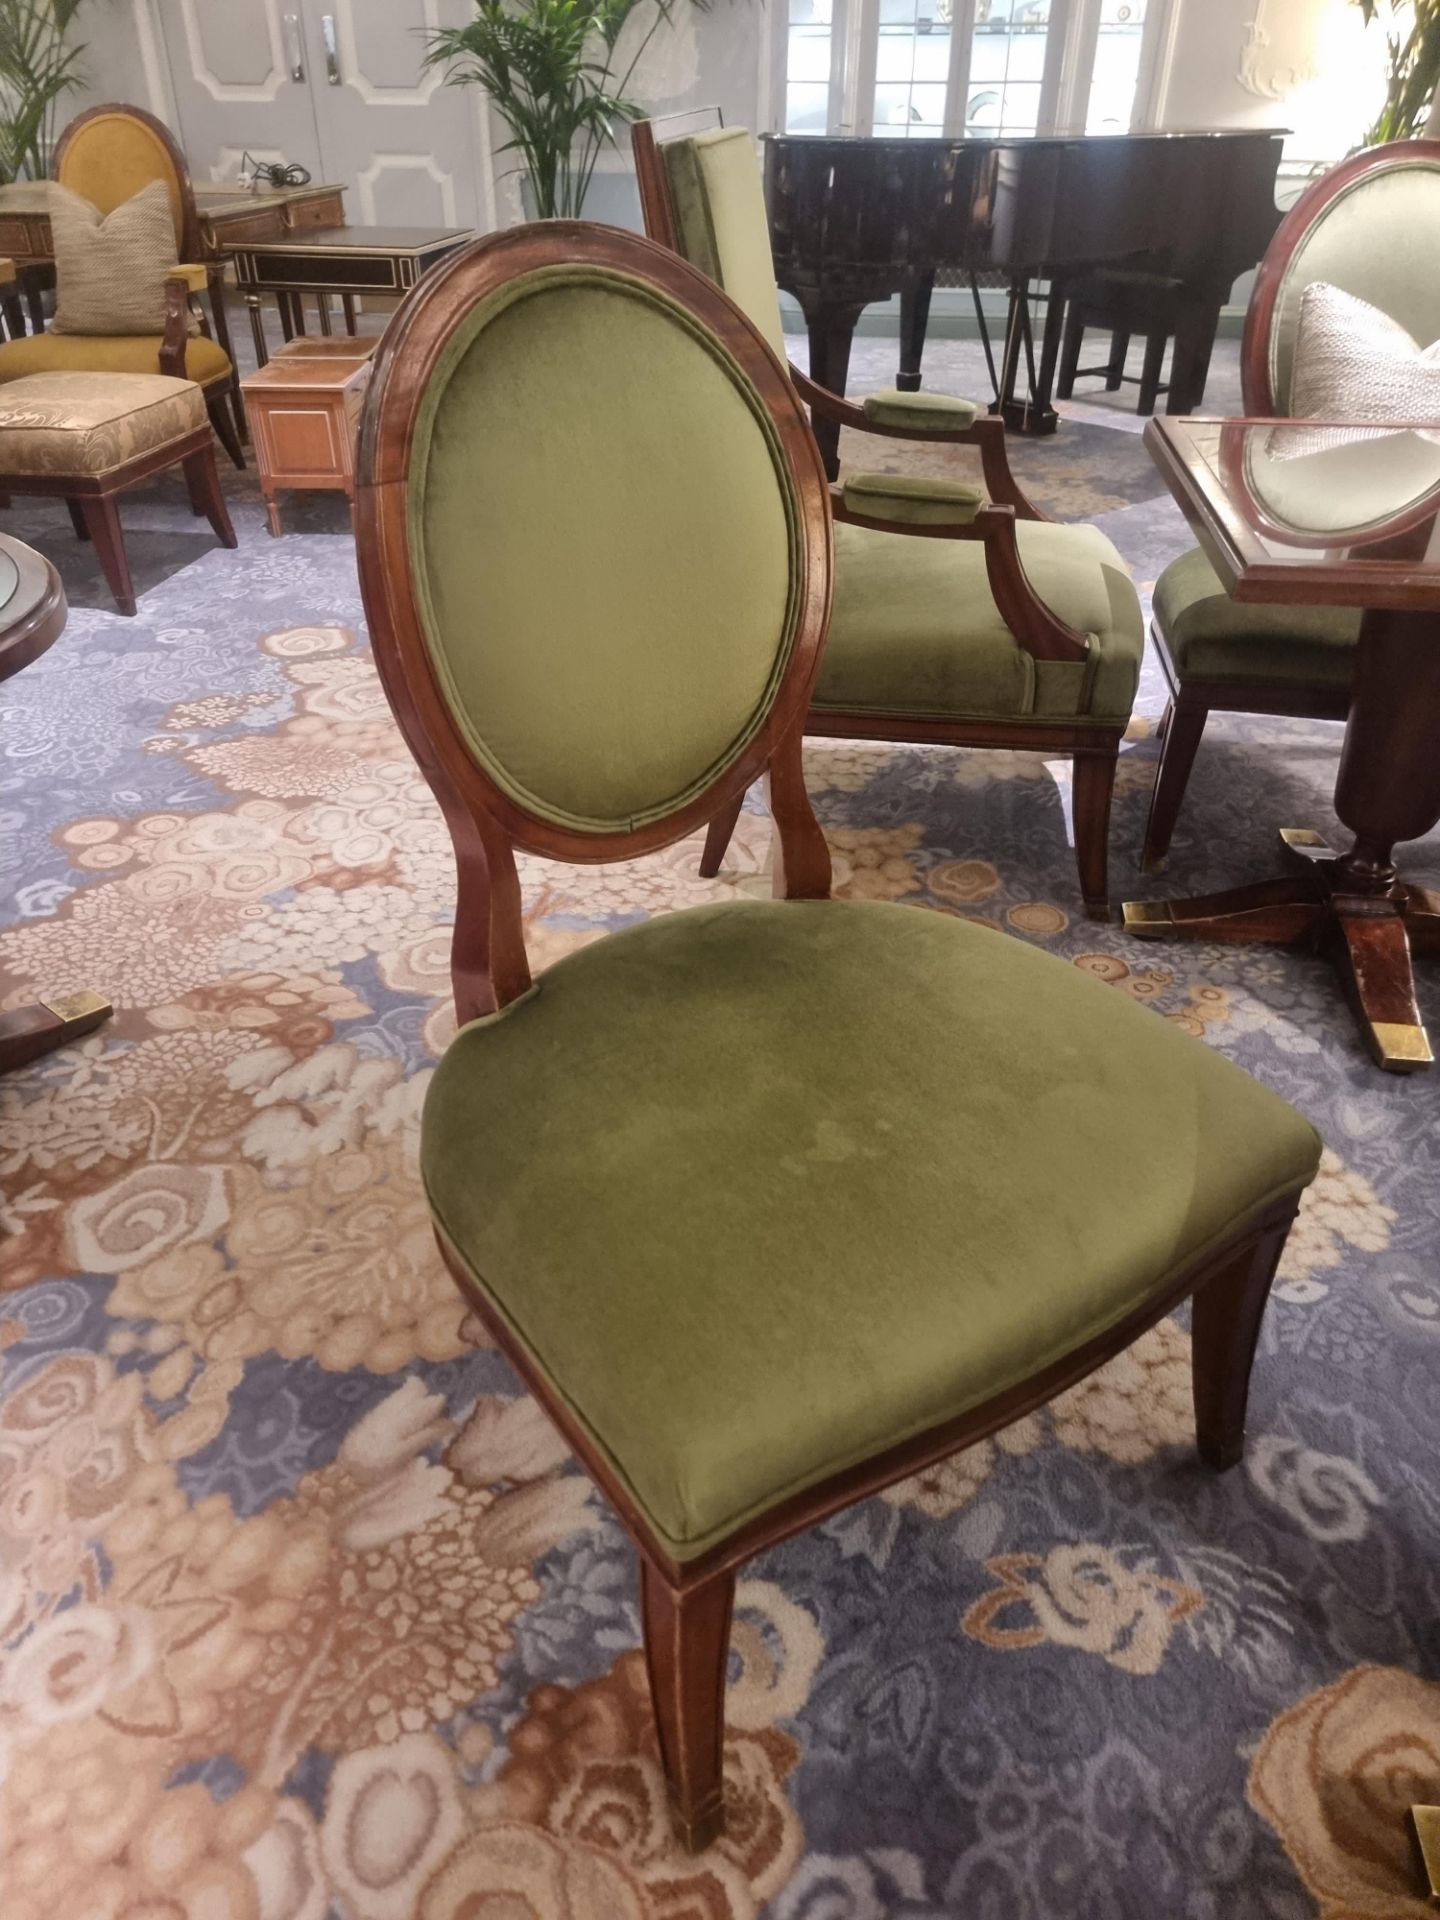 Louis XVI Style Framed And Upholstered Arm Chair In Lelievre Paris Olive Green Salon Chair 68 x 68 x - Image 5 of 5